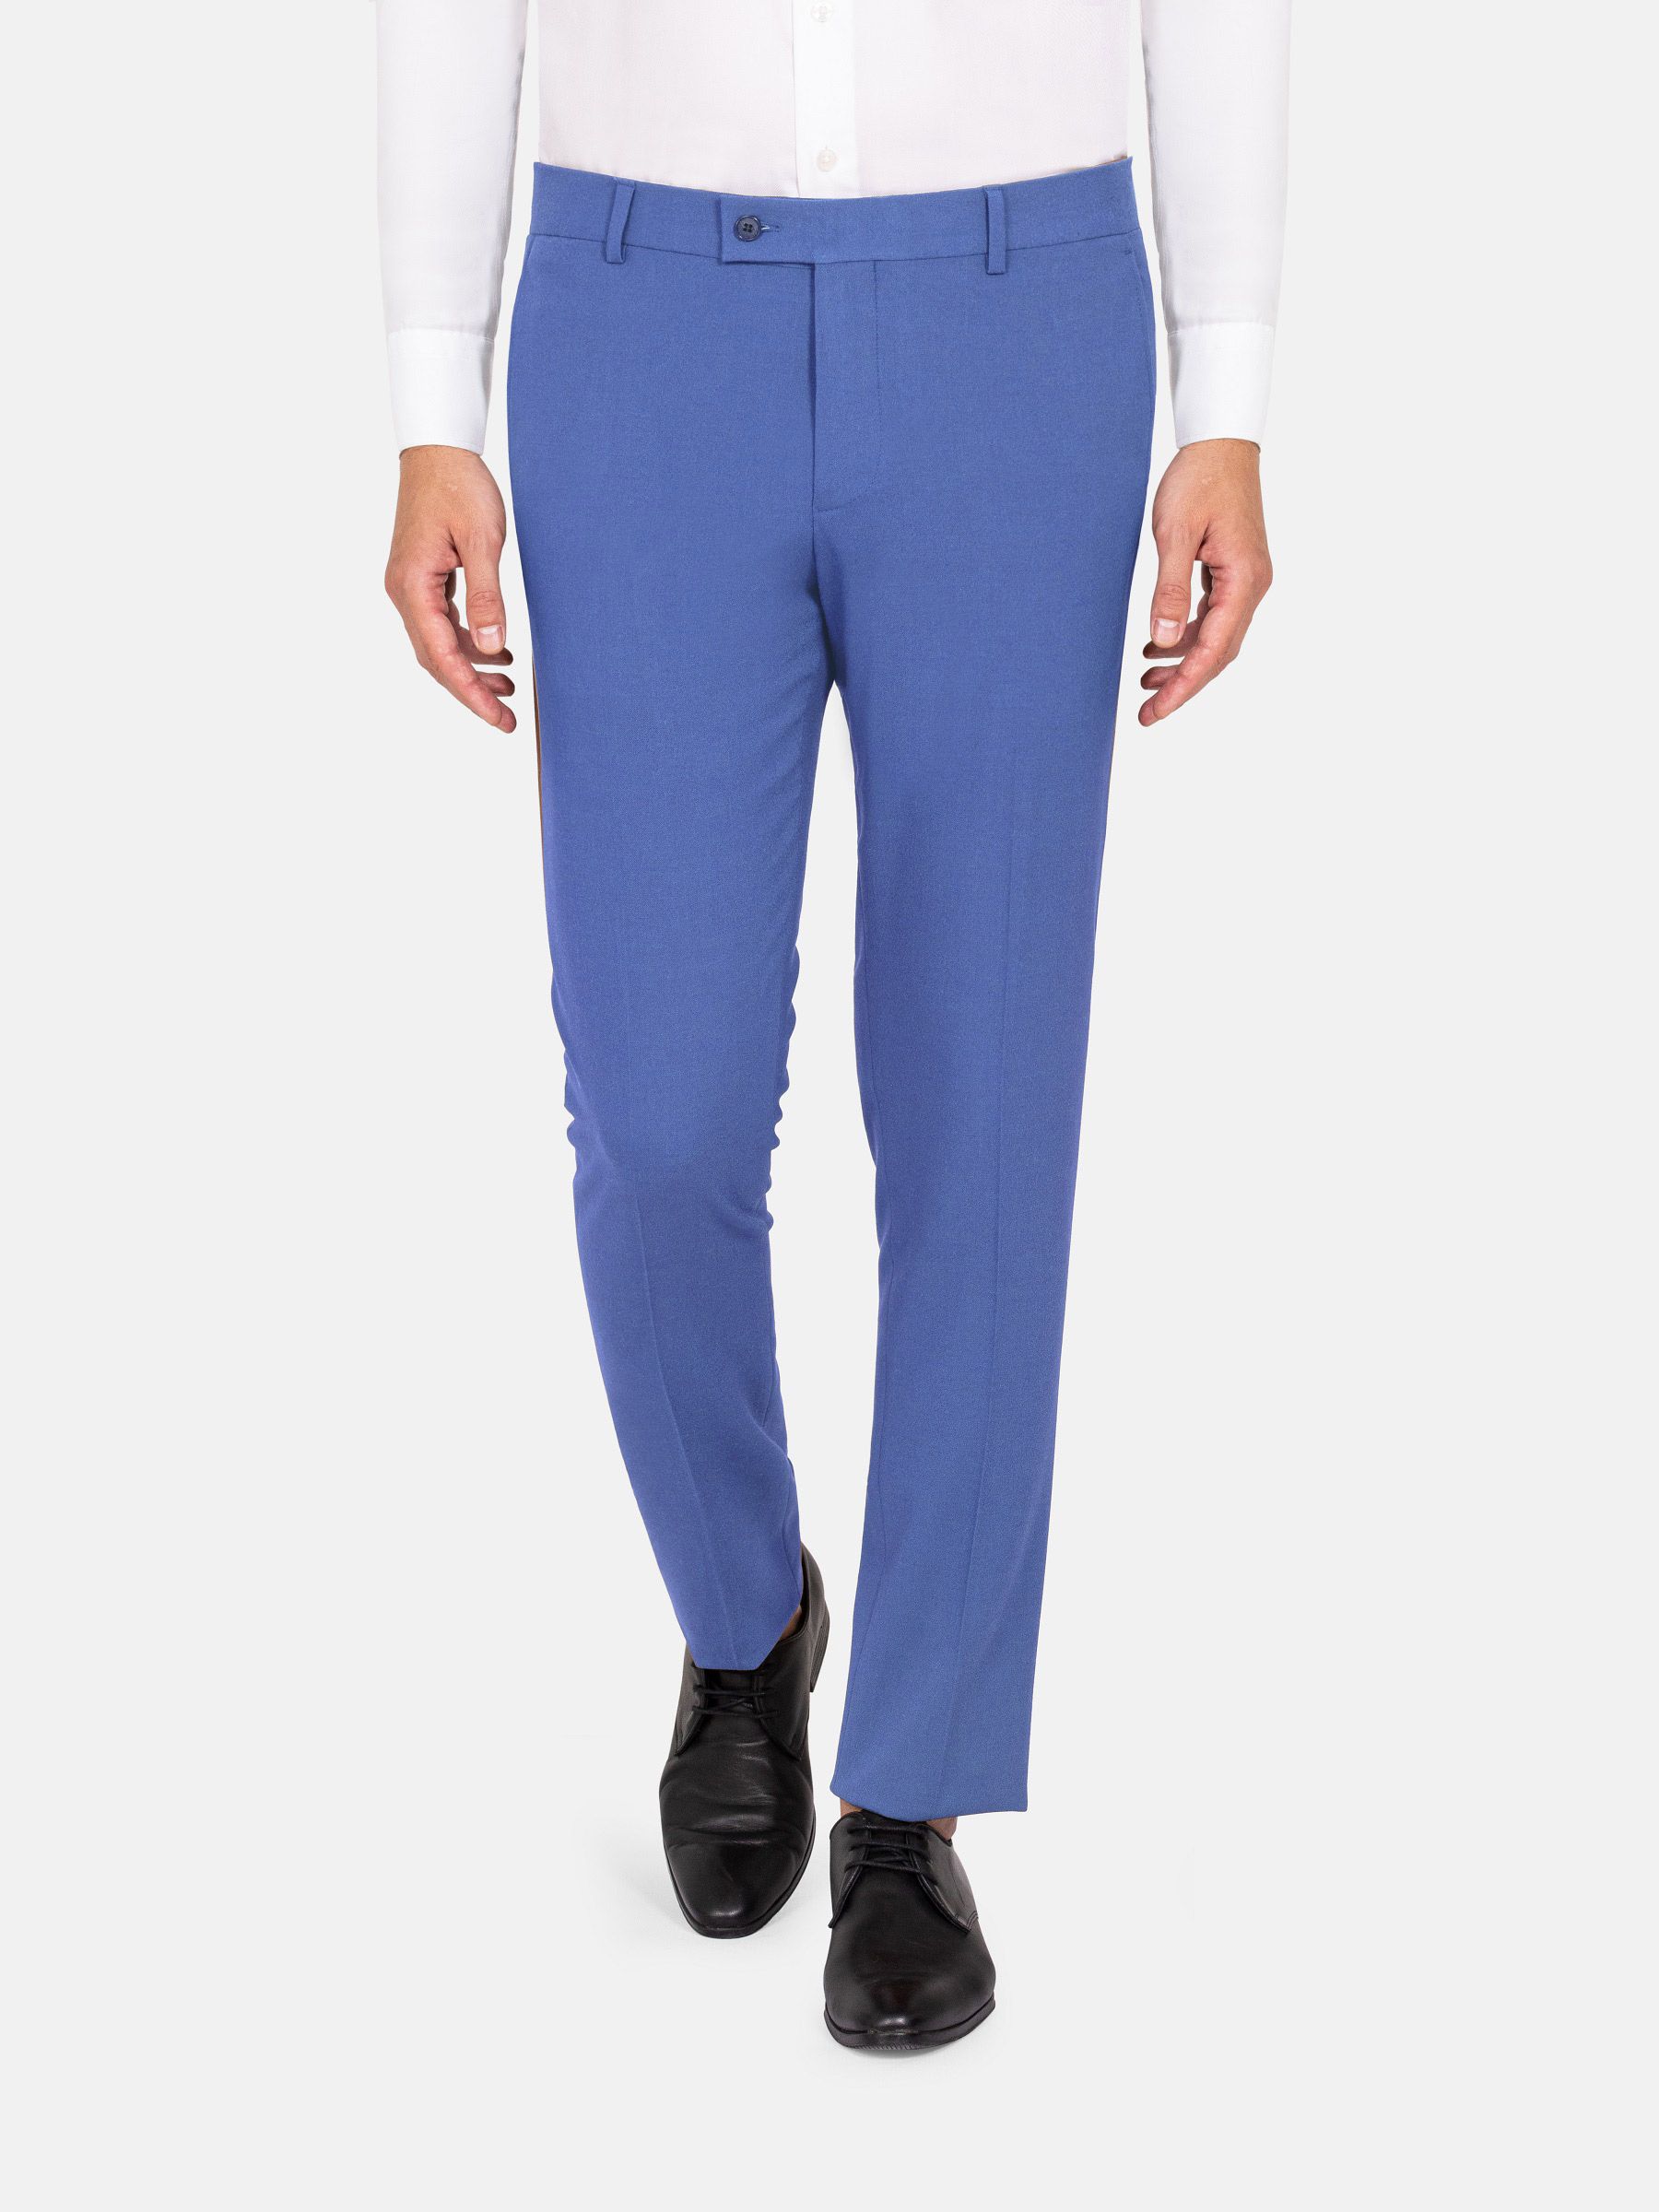 Blue Mens Trousers - Buy Blue Mens Trousers Online at Best Prices In India  | Flipkart.com